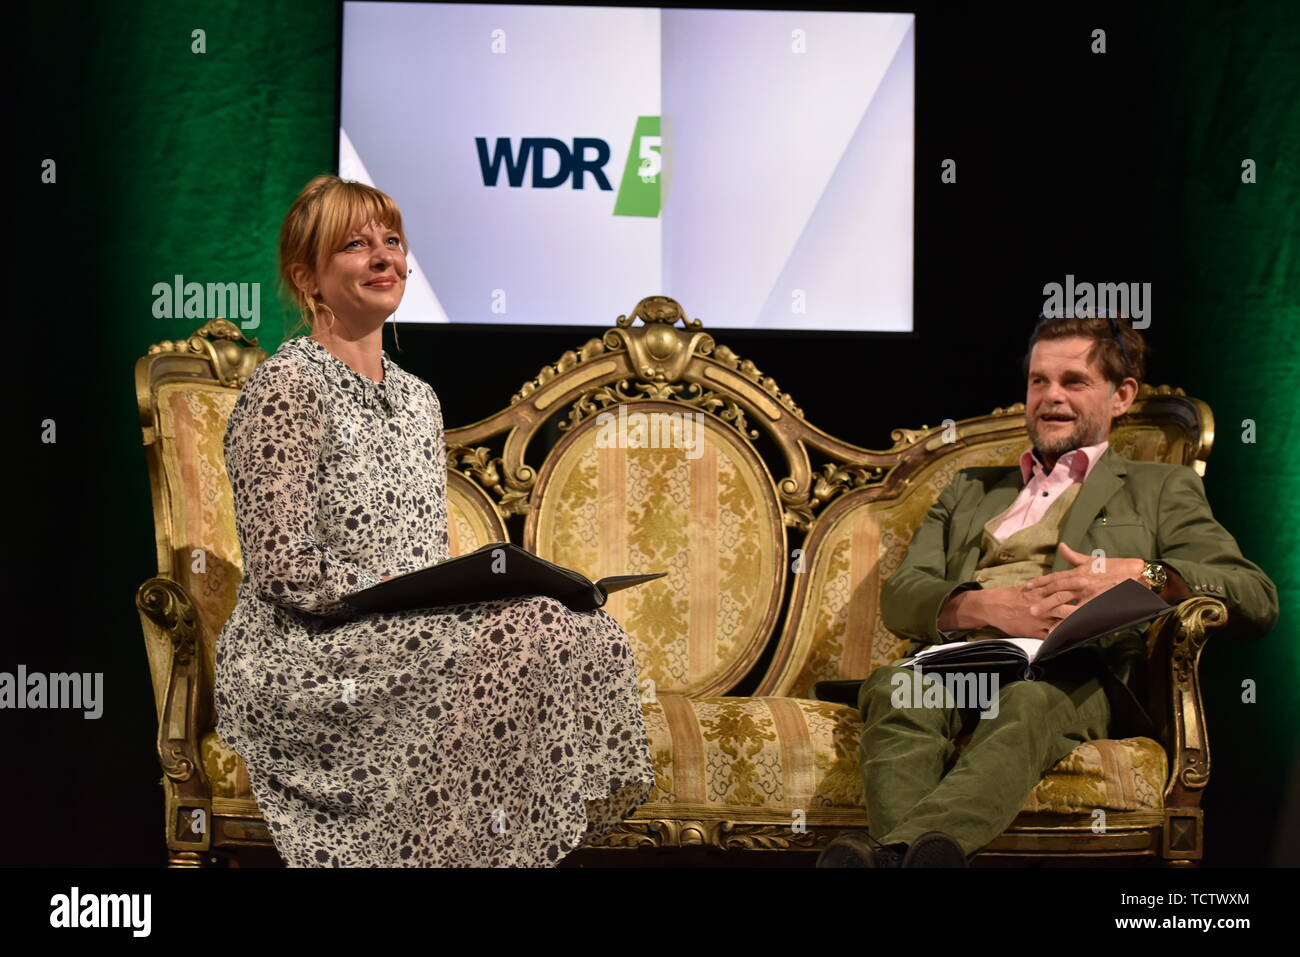 Cologne, Germany. 09th June, 2019. The actors Jördis Triebel and Lars Rudolph sit on a sofa and read Diderot at the 7th phil.cologne, the biggest German philosophy festival. Credit: Horst Galuschka/dpa/Alamy Live News Stock Photo